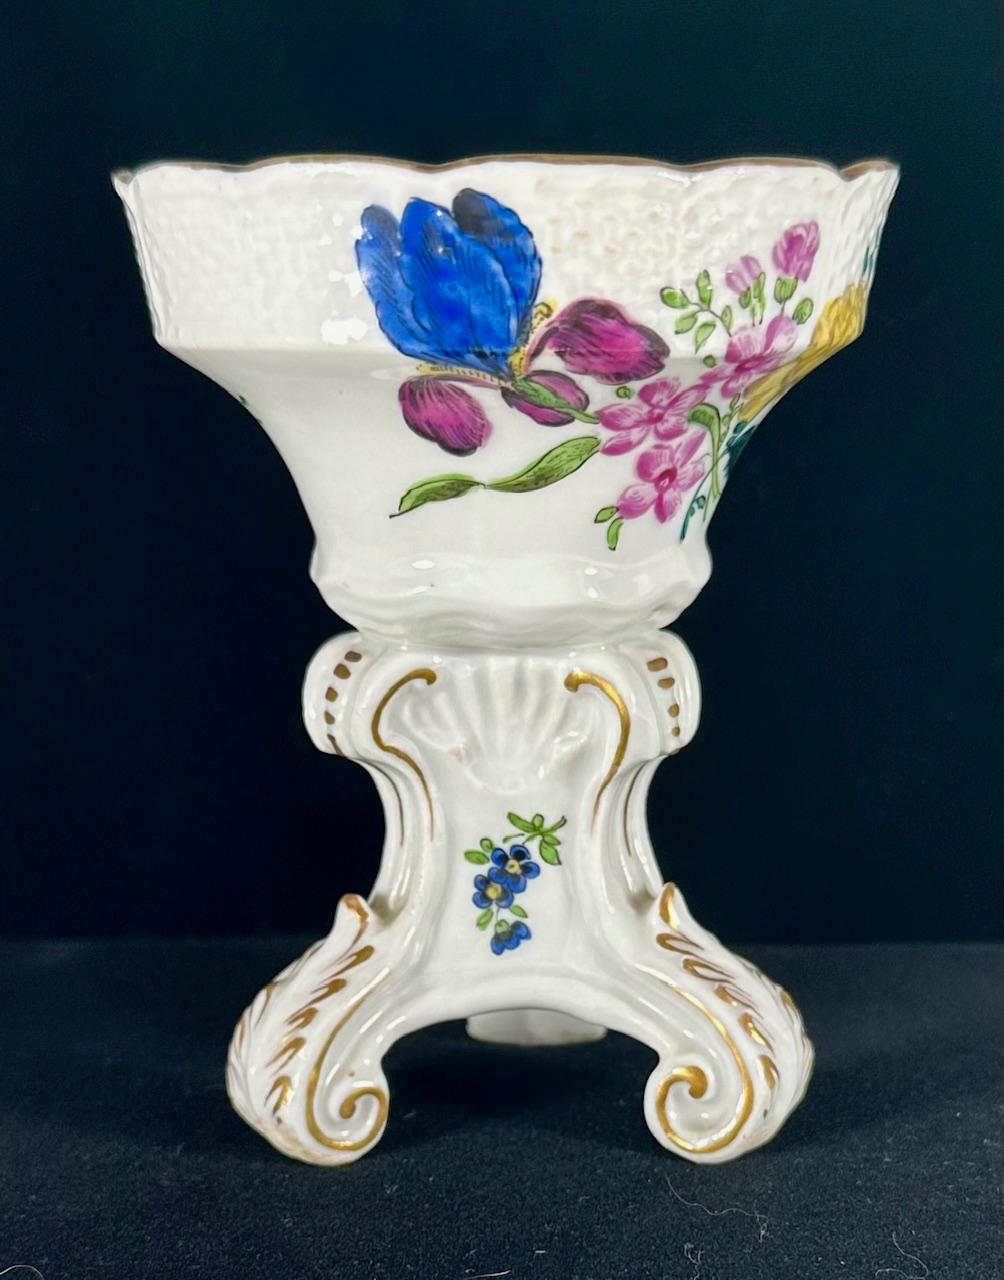 Antique Meissen Porcelain Footed Salt Cellar ca. 1735 Hand Painted

Rare Meissen porcelain salt cellar on three voluted feet accented in gold and polychromed. The tapered, circular bowl with basketweave border is polychrome hand painted in overglaze